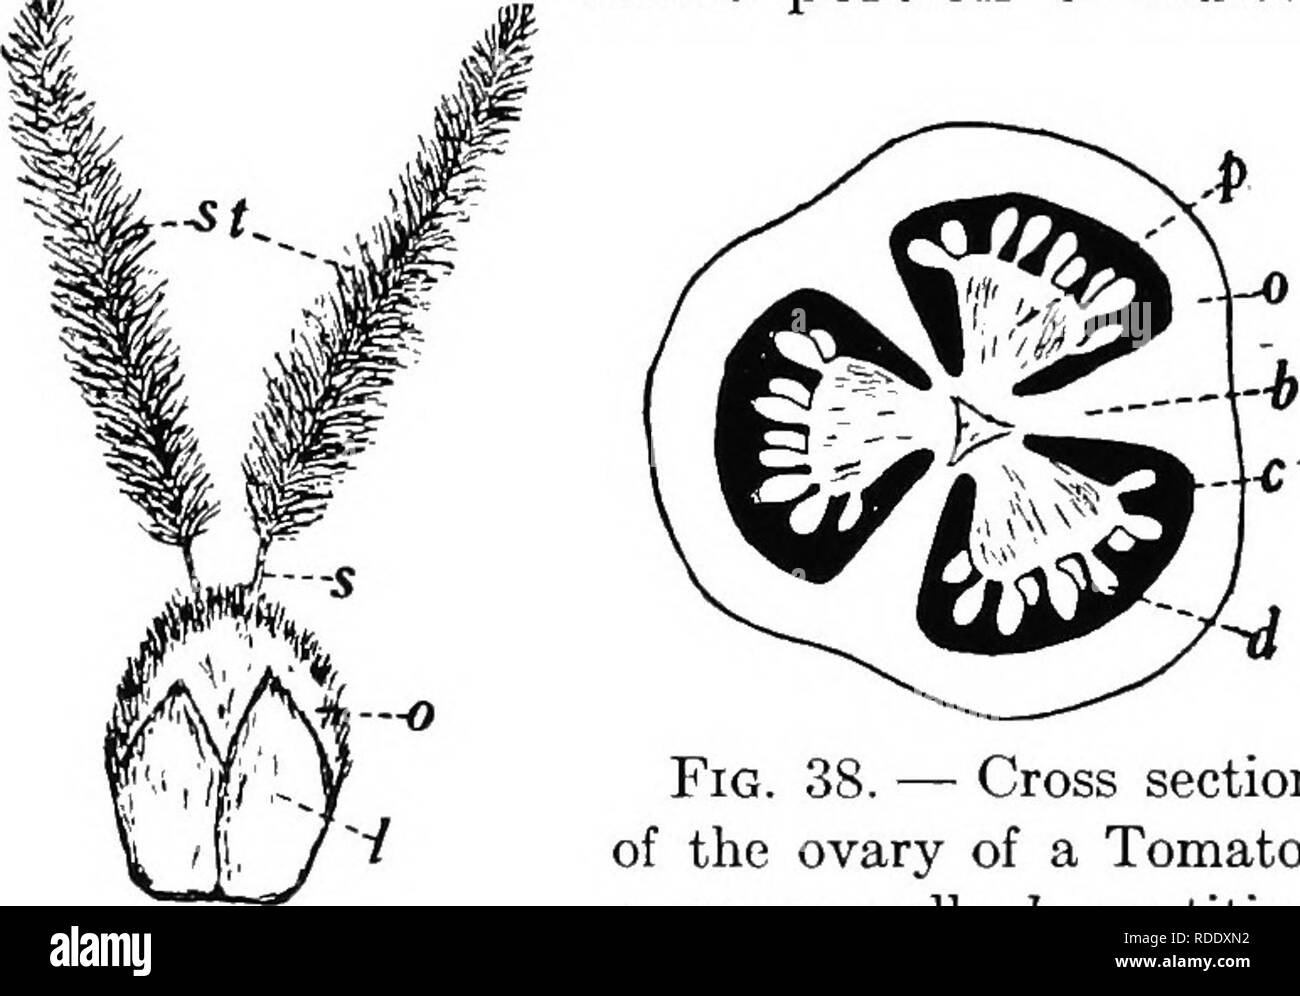 . Botany for agricultural students . Botany. Fig. 36. — Pistillate flower of Corn, drawn to show the parts of the pistil. A portion of the bracts have been cut away to give a view of the ovary. 0, ovary, the portion that becomes the ker- nel; s, style; si, stigma. Much enlarged.. Fig. 37. — Pistil of Wheat and the two lodicules. o, ovary; st, stigmas; s, styles; I, lodicules. Much en- larged. Fig. 38. — Cross section of the ovary of a Tomato. 0, ovary wall; 6, partition walls of the ovary; c, locules or cavities in the ovary; d, ovules; p, placentas or parts of the ovary to which the ovules ar Stock Photo